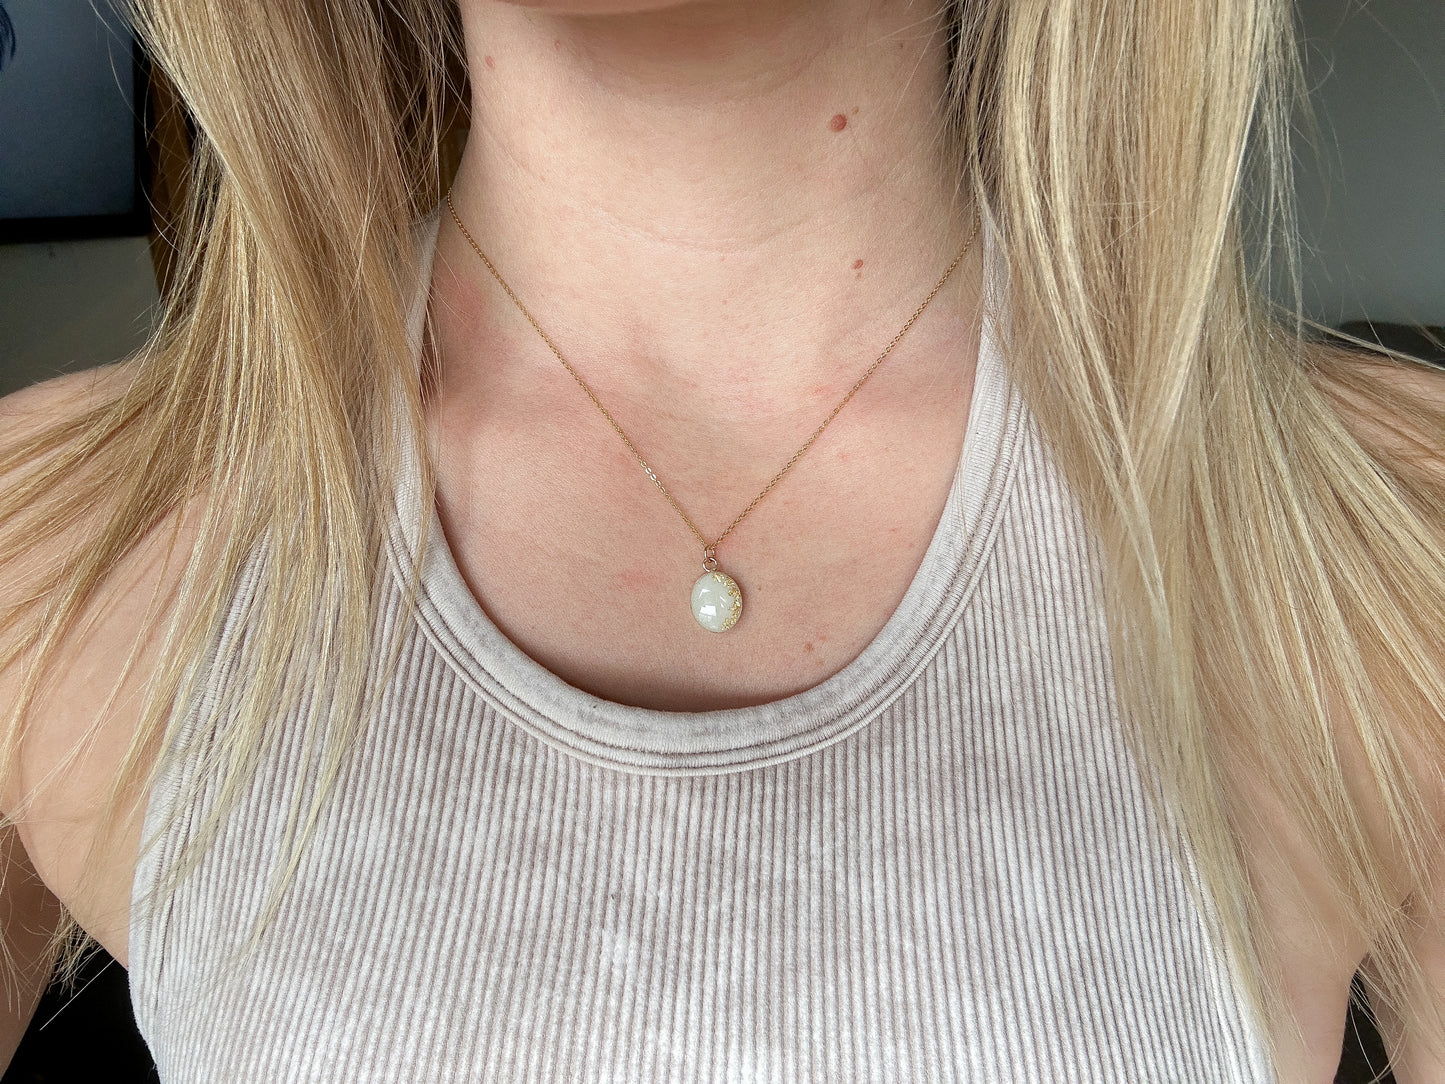 oval gold filled necklace